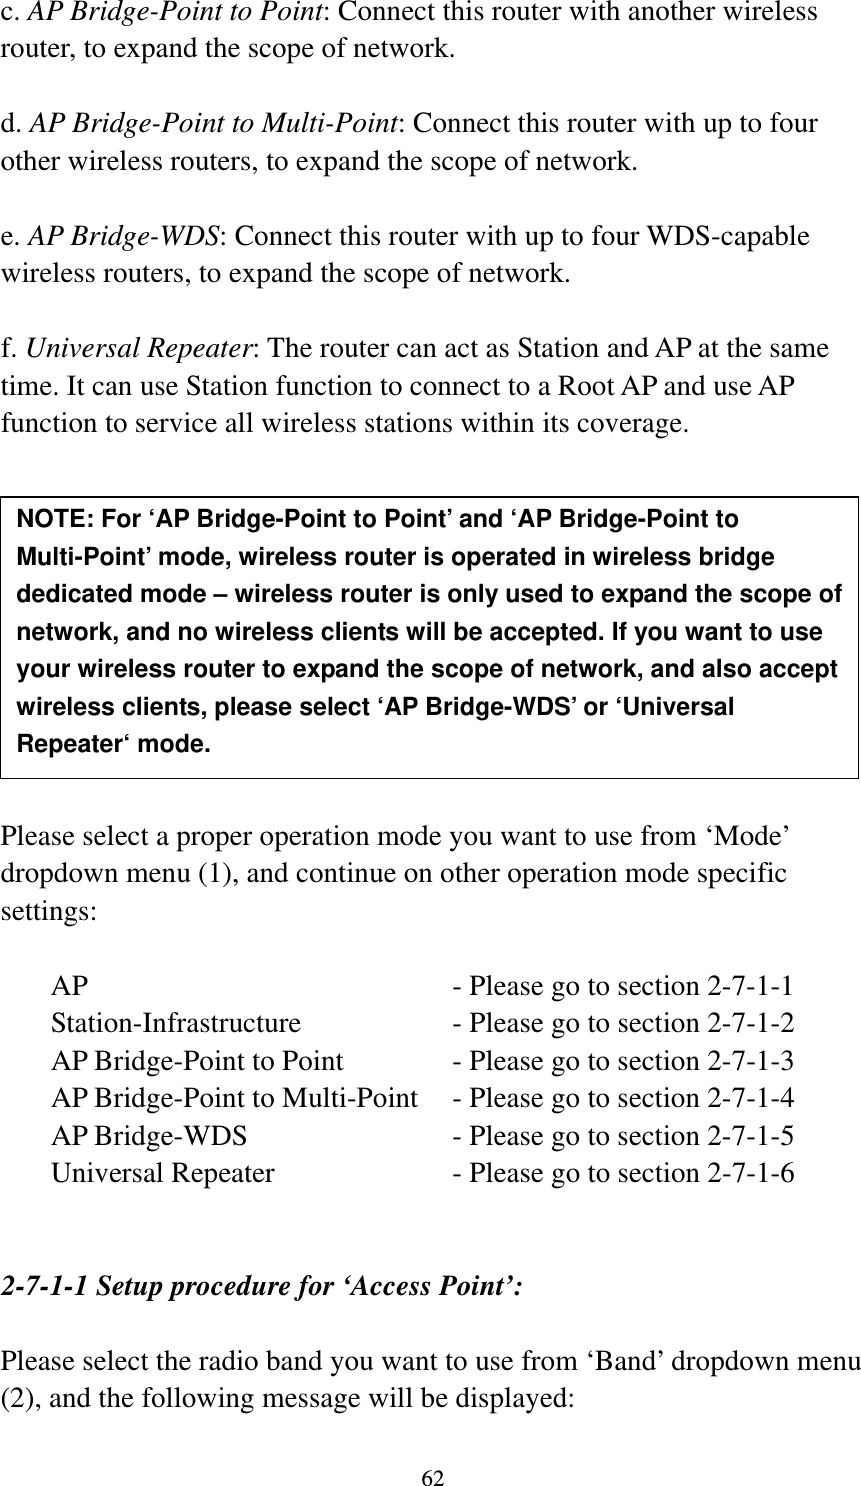 62 c. AP Bridge-Point to Point: Connect this router with another wireless router, to expand the scope of network.    d. AP Bridge-Point to Multi-Point: Connect this router with up to four other wireless routers, to expand the scope of network.  e. AP Bridge-WDS: Connect this router with up to four WDS-capable wireless routers, to expand the scope of network.  f. Universal Repeater: The router can act as Station and AP at the same time. It can use Station function to connect to a Root AP and use AP function to service all wireless stations within its coverage.           Please select a proper operation mode you want to use from ‘Mode’ dropdown menu (1), and continue on other operation mode specific settings:  AP        - Please go to section 2-7-1-1 Station-Infrastructure        - Please go to section 2-7-1-2 AP Bridge-Point to Point     - Please go to section 2-7-1-3 AP Bridge-Point to Multi-Point  - Please go to section 2-7-1-4 AP Bridge-WDS         - Please go to section 2-7-1-5 Universal Repeater          - Please go to section 2-7-1-6   2-7-1-1 Setup procedure for ‘Access Point’:  Please select the radio band you want to use from ‘Band’ dropdown menu (2), and the following message will be displayed: NOTE: For ‘AP Bridge-Point to Point’ and ‘AP Bridge-Point to Multi-Point’ mode, wireless router is operated in wireless bridge dedicated mode – wireless router is only used to expand the scope of network, and no wireless clients will be accepted. If you want to use your wireless router to expand the scope of network, and also accept wireless clients, please select ‘AP Bridge-WDS’ or ‘Universal Repeater‘ mode. 